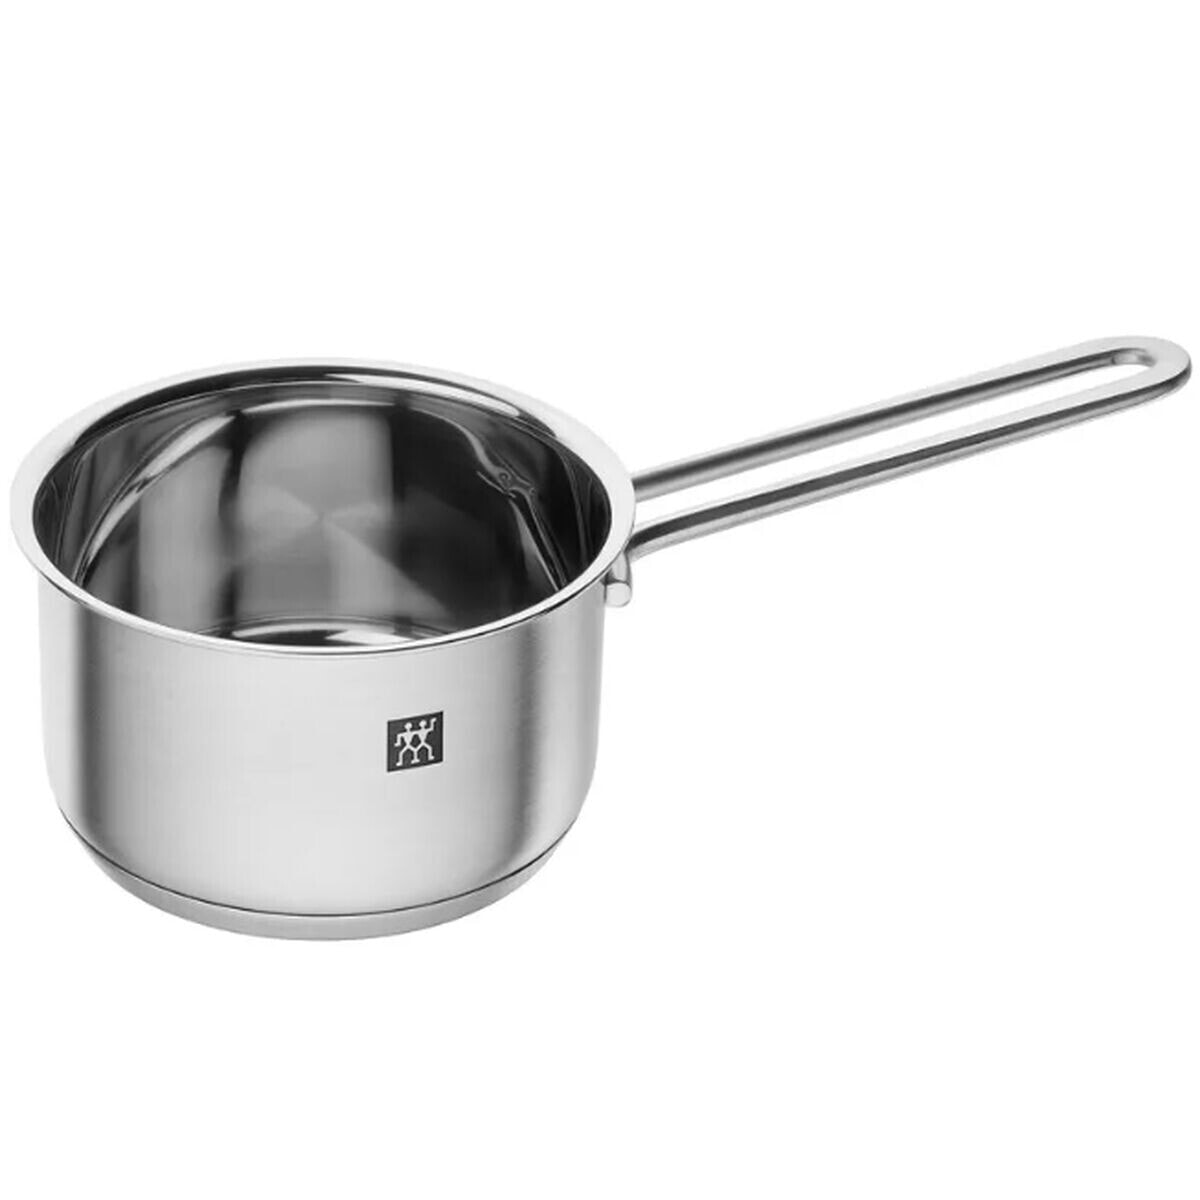 Pan Zwilling Pico Silver Stainless steel Ø 12 cm 13,3 x 7 x 27 cm (1 Unit)